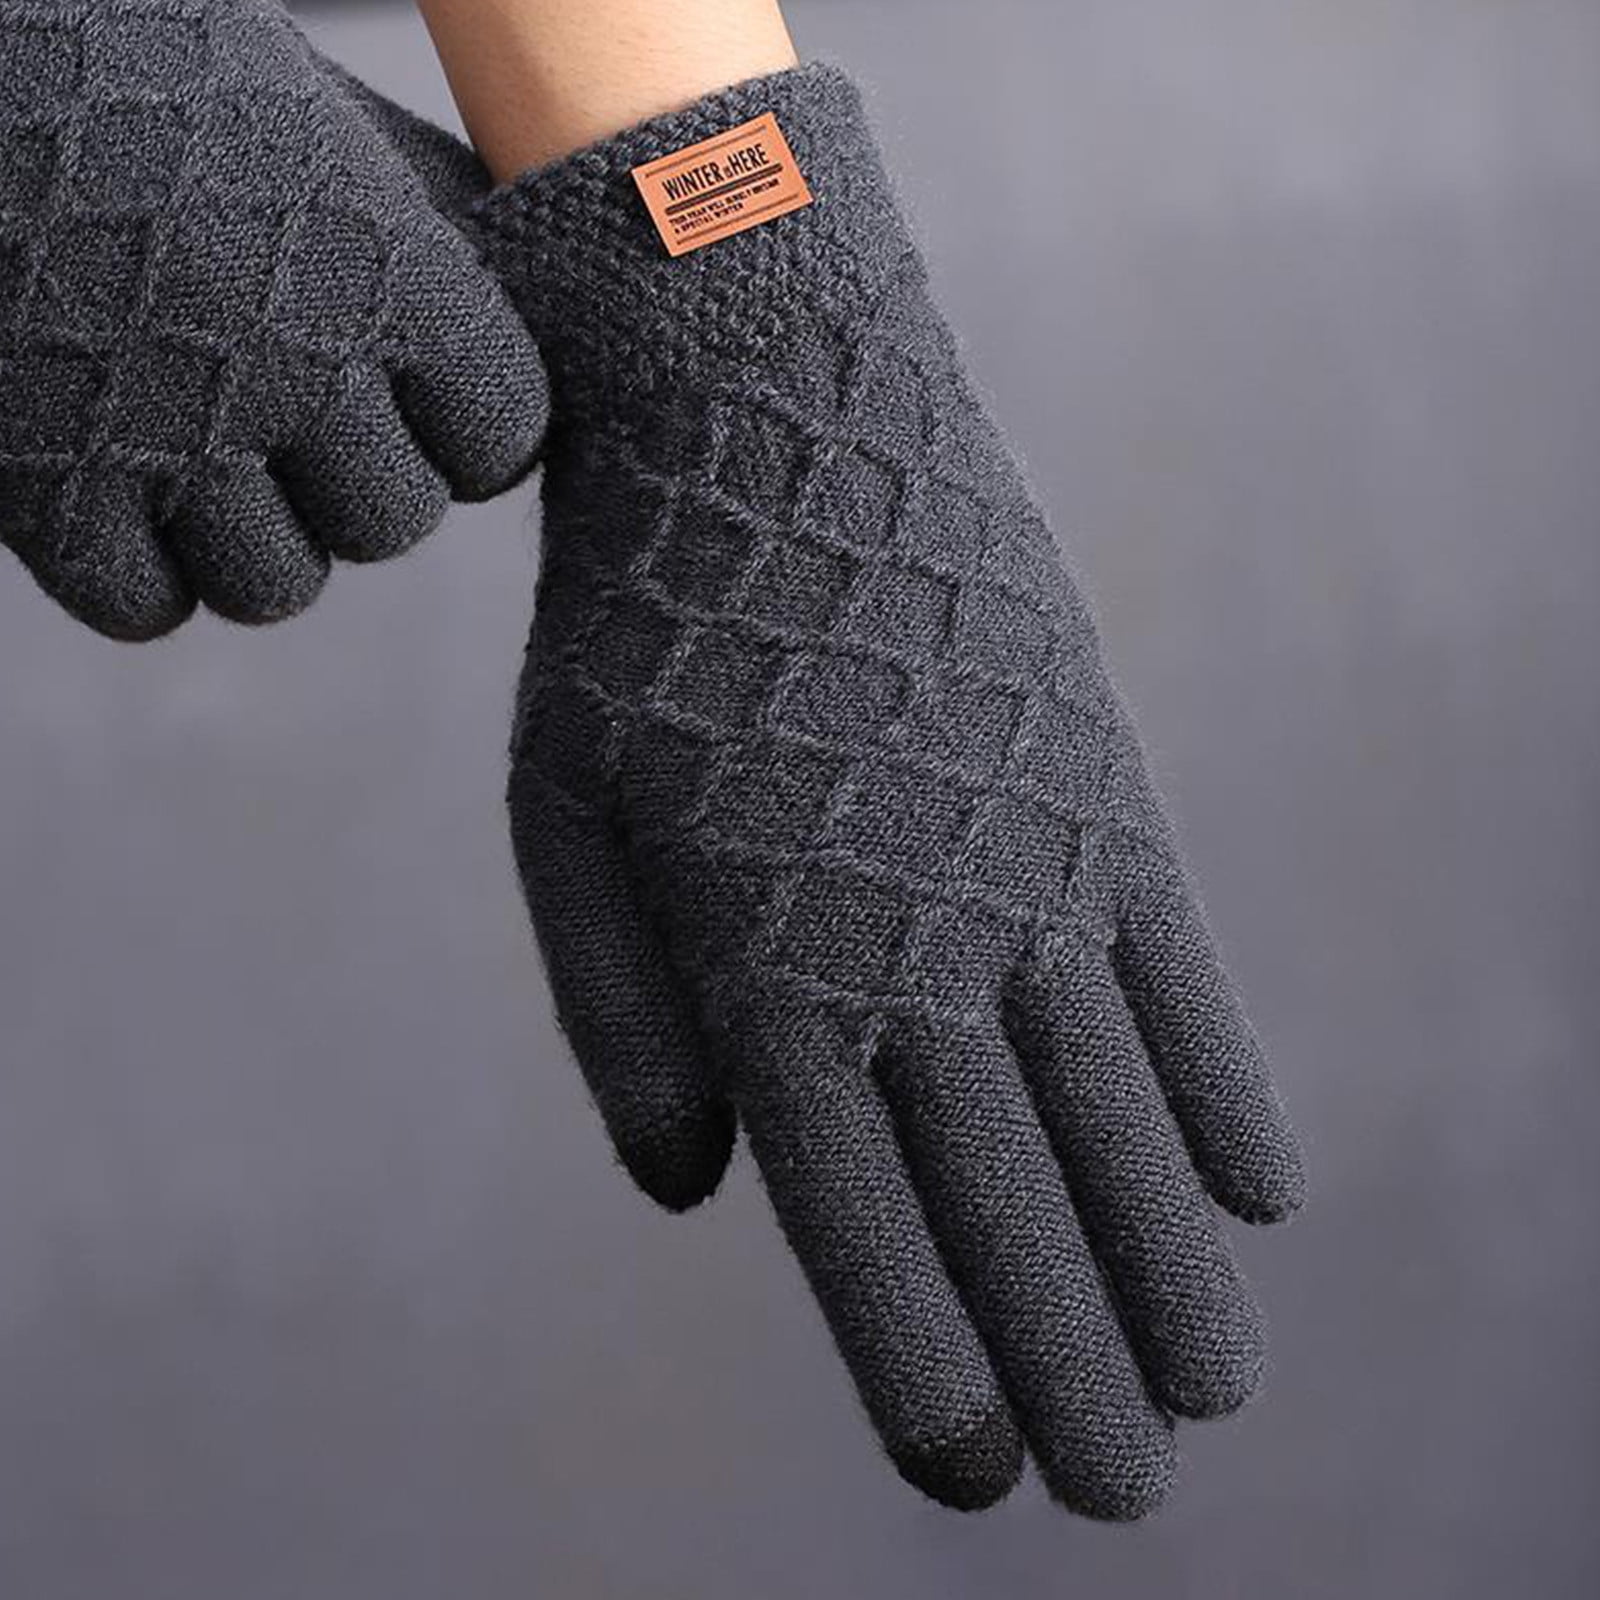 winter plus velvet to keep warm wind and cold sports gloves sports safety protection outdoor accessories - Walmart.com